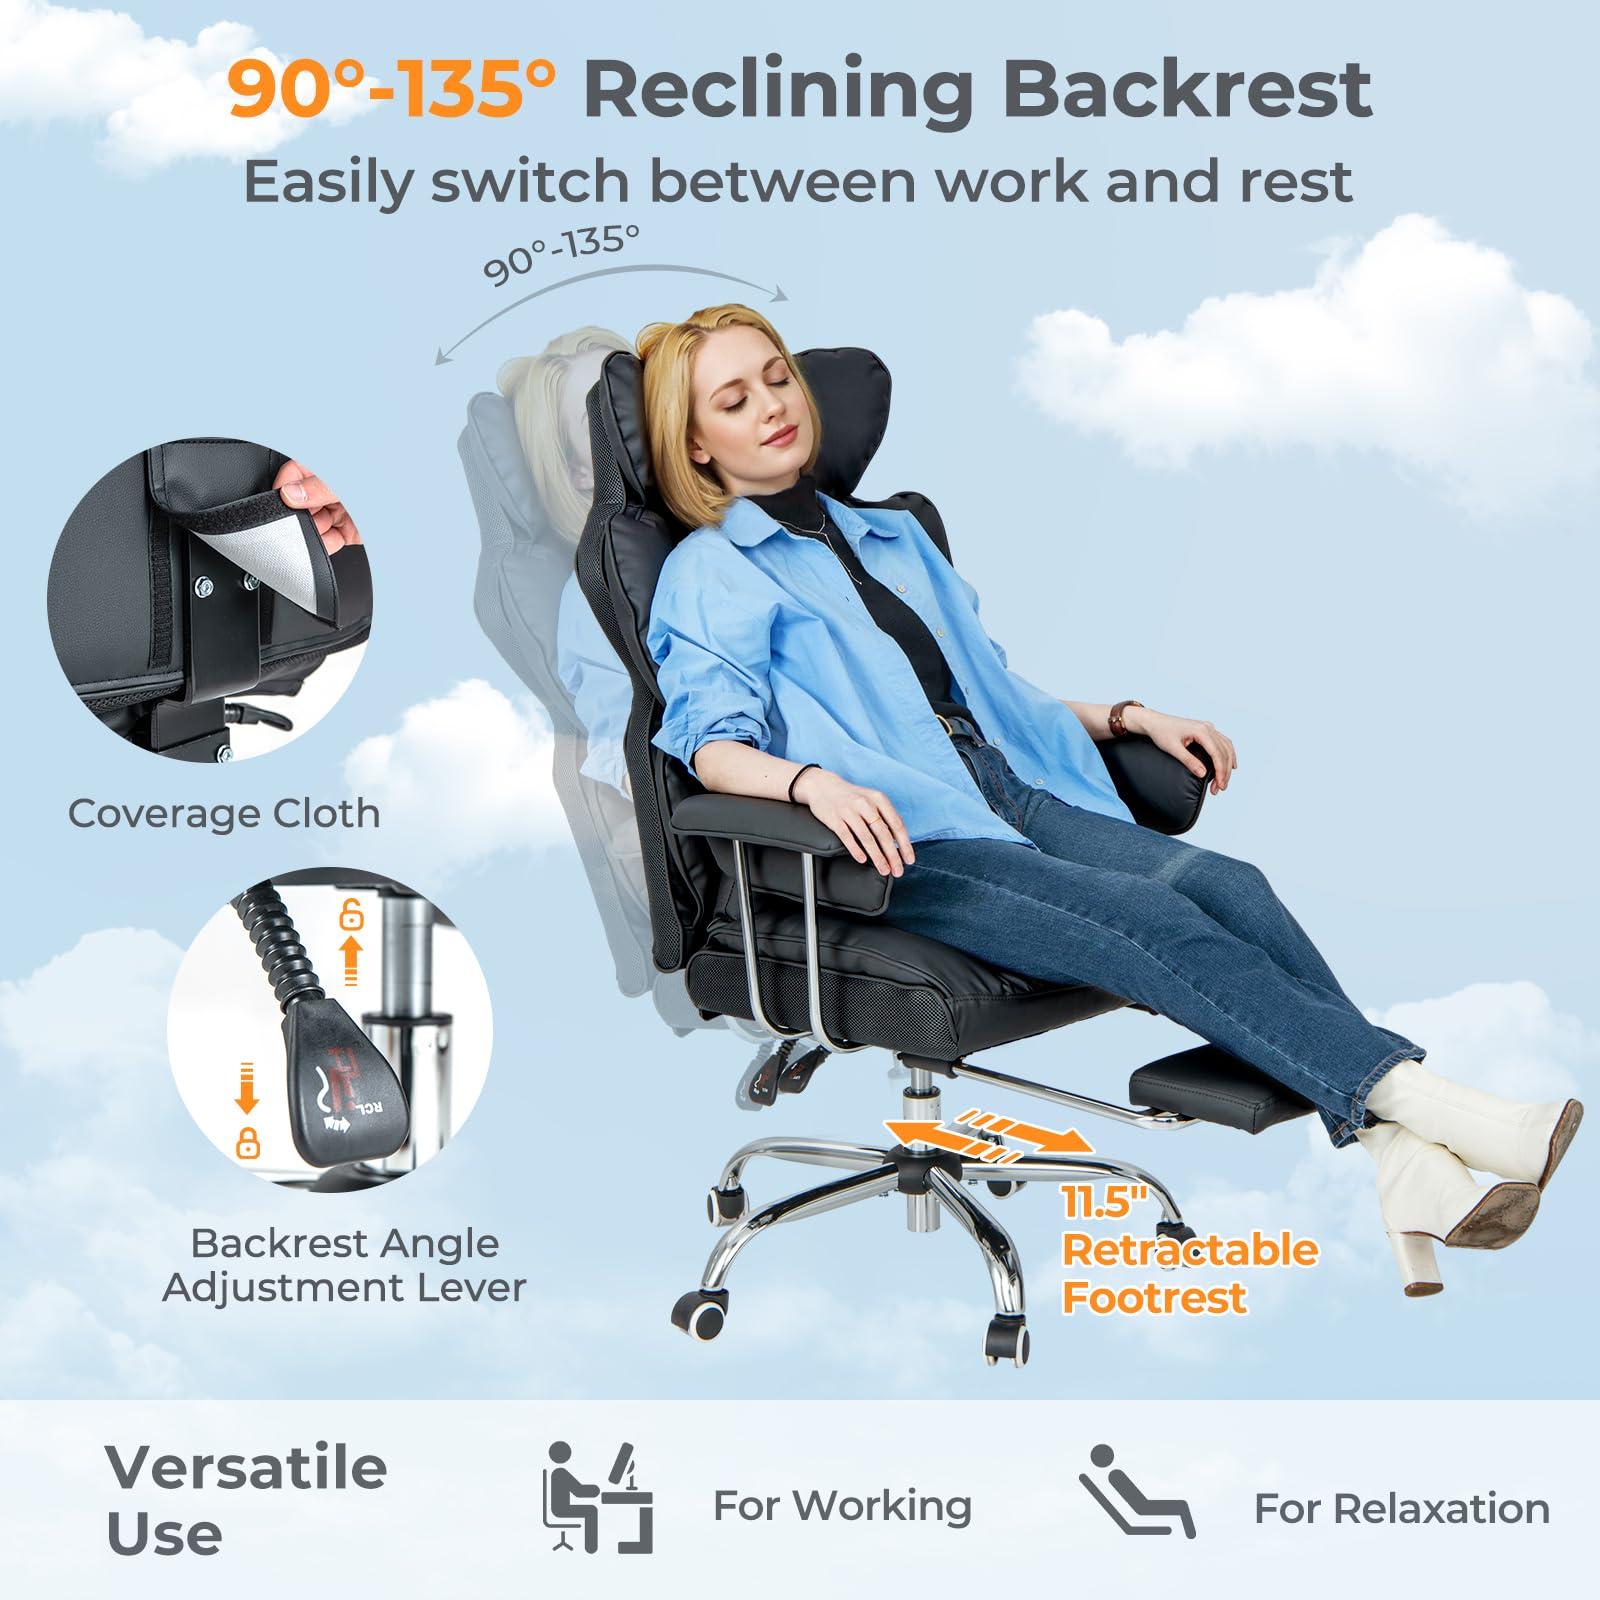 Giantex Office Desk Chair, High Back Executive Office Chair with Foot Rest and Lumbar Support